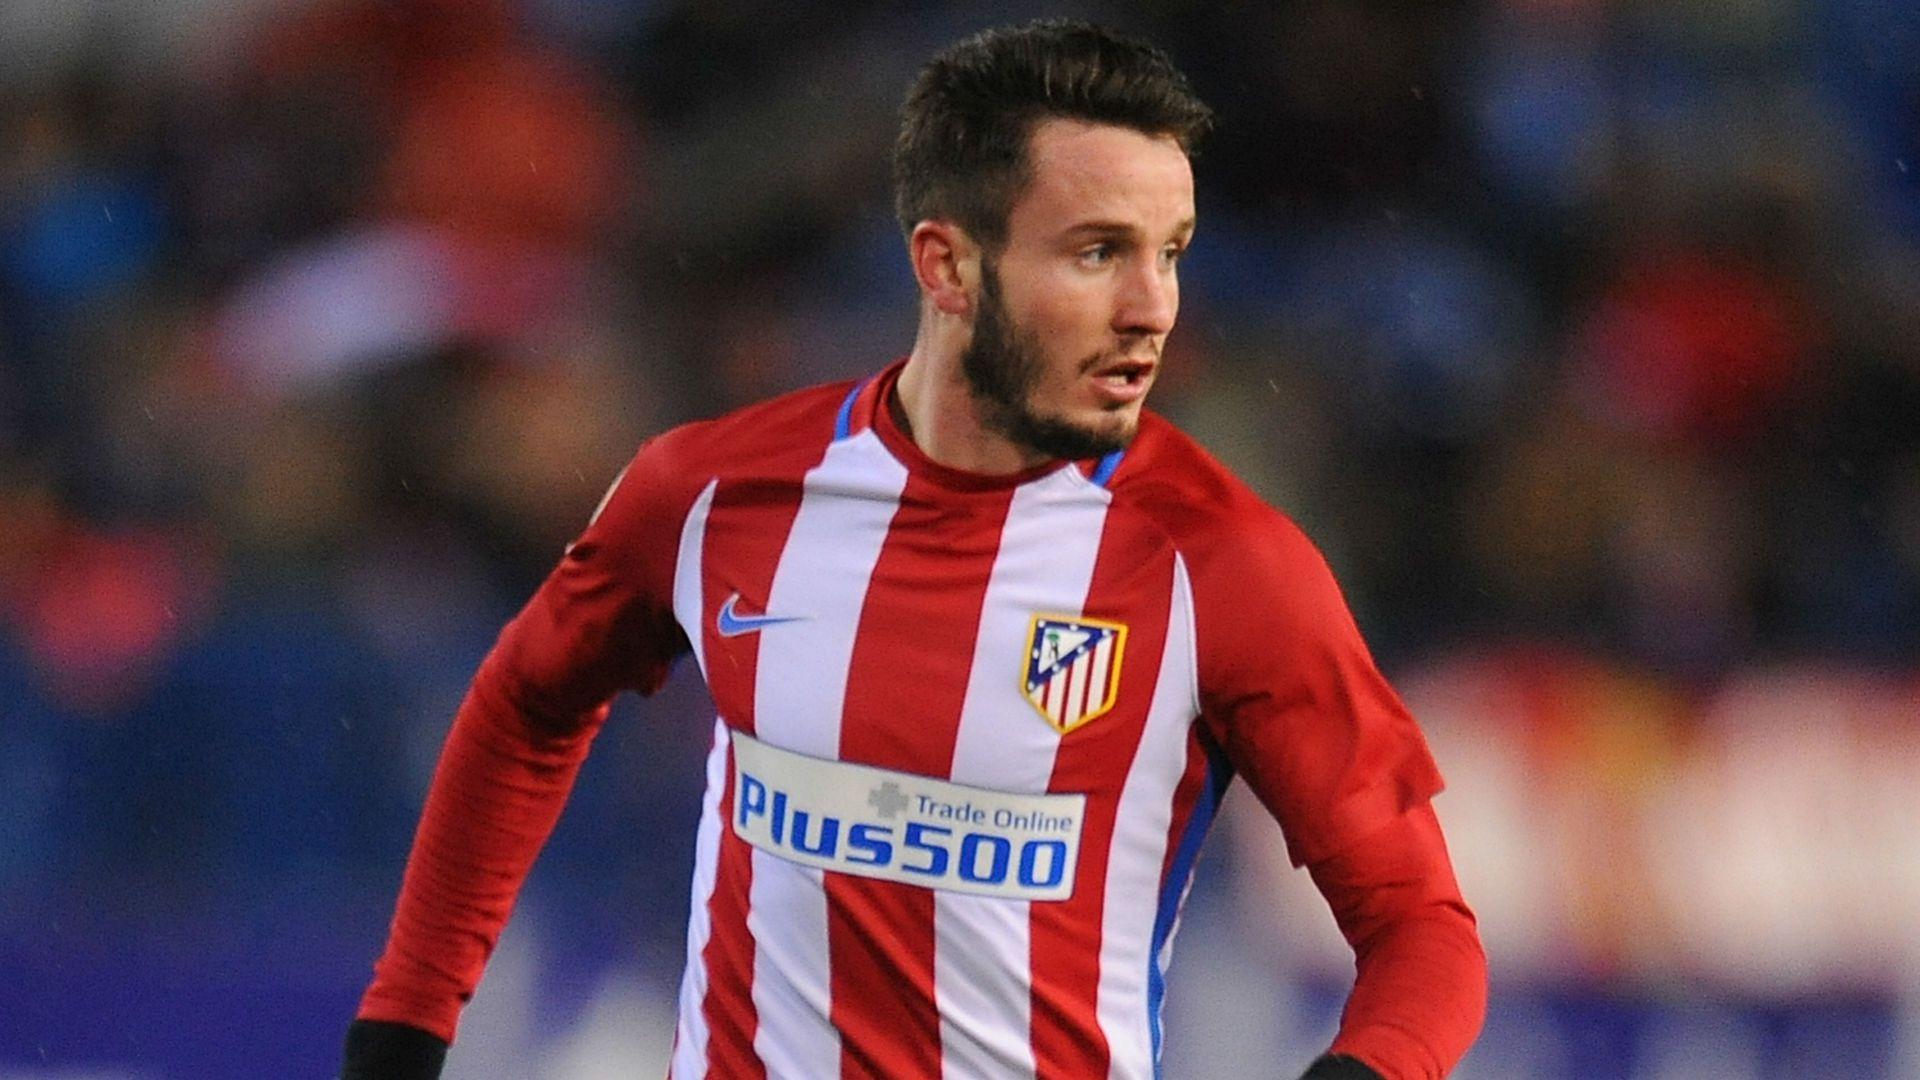 Saul Niguez HD Wallpapers free